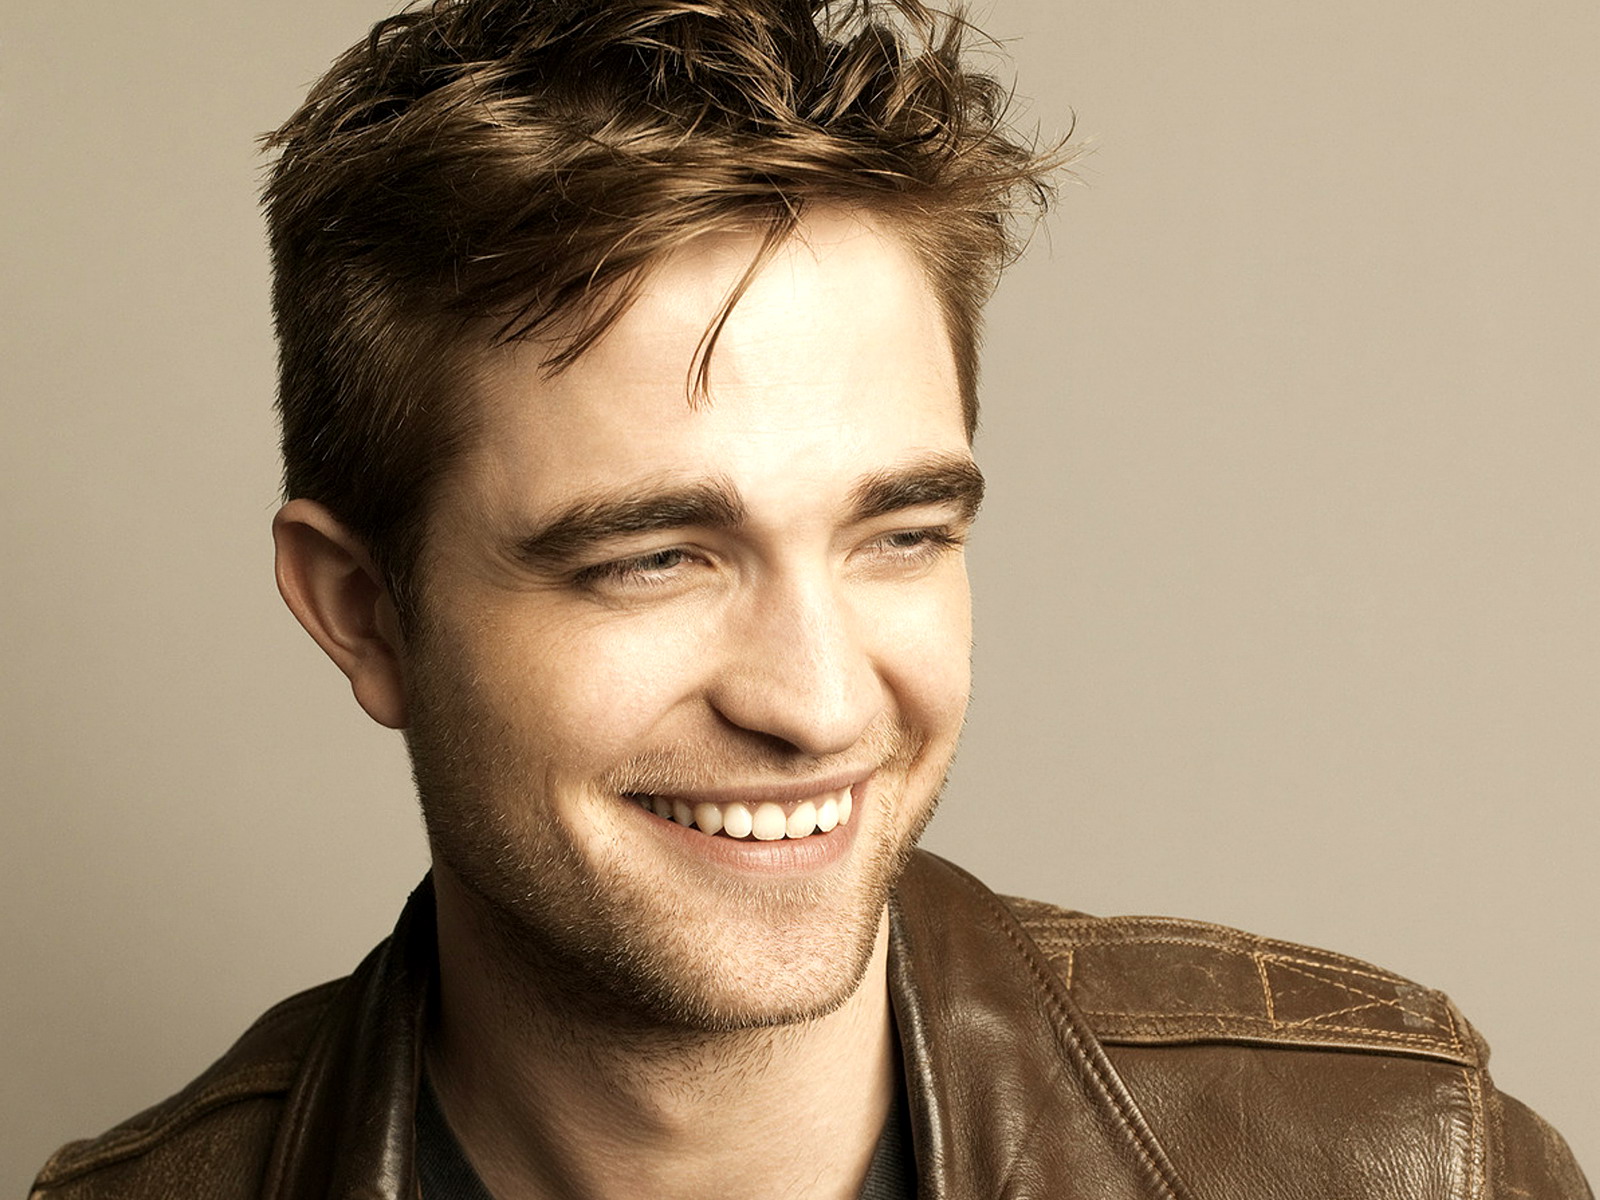 robert pattinson hd wallpapers,hair,face,forehead,hairstyle,facial expression